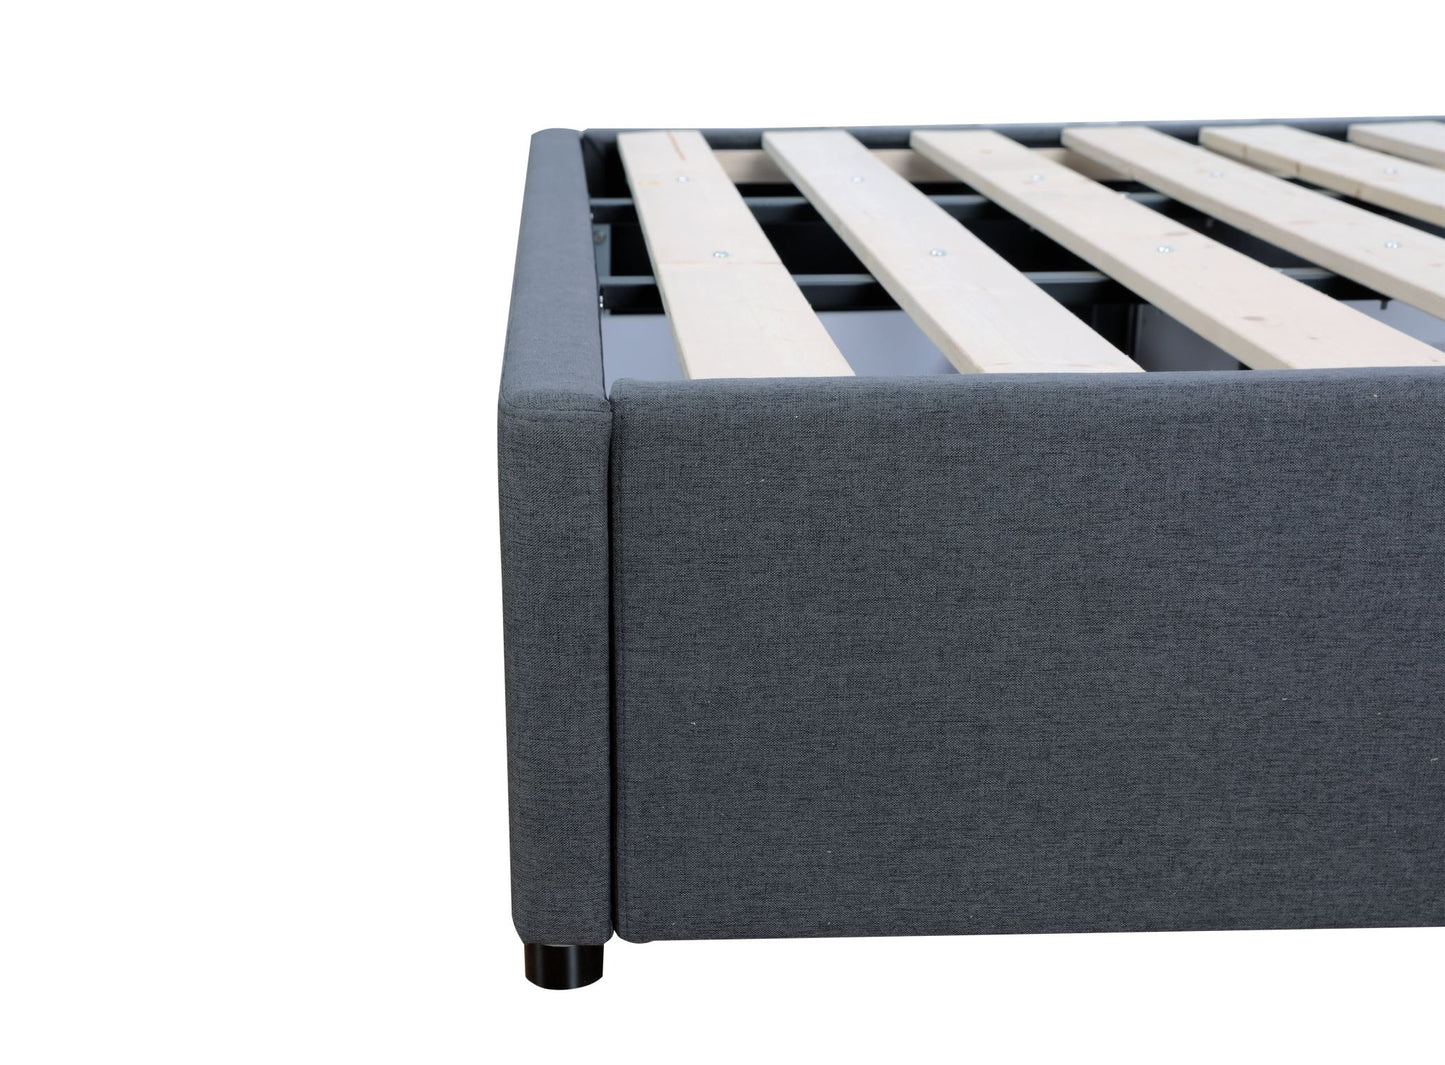 Bed Bases with 3 Drawers - Super King - Charcoal